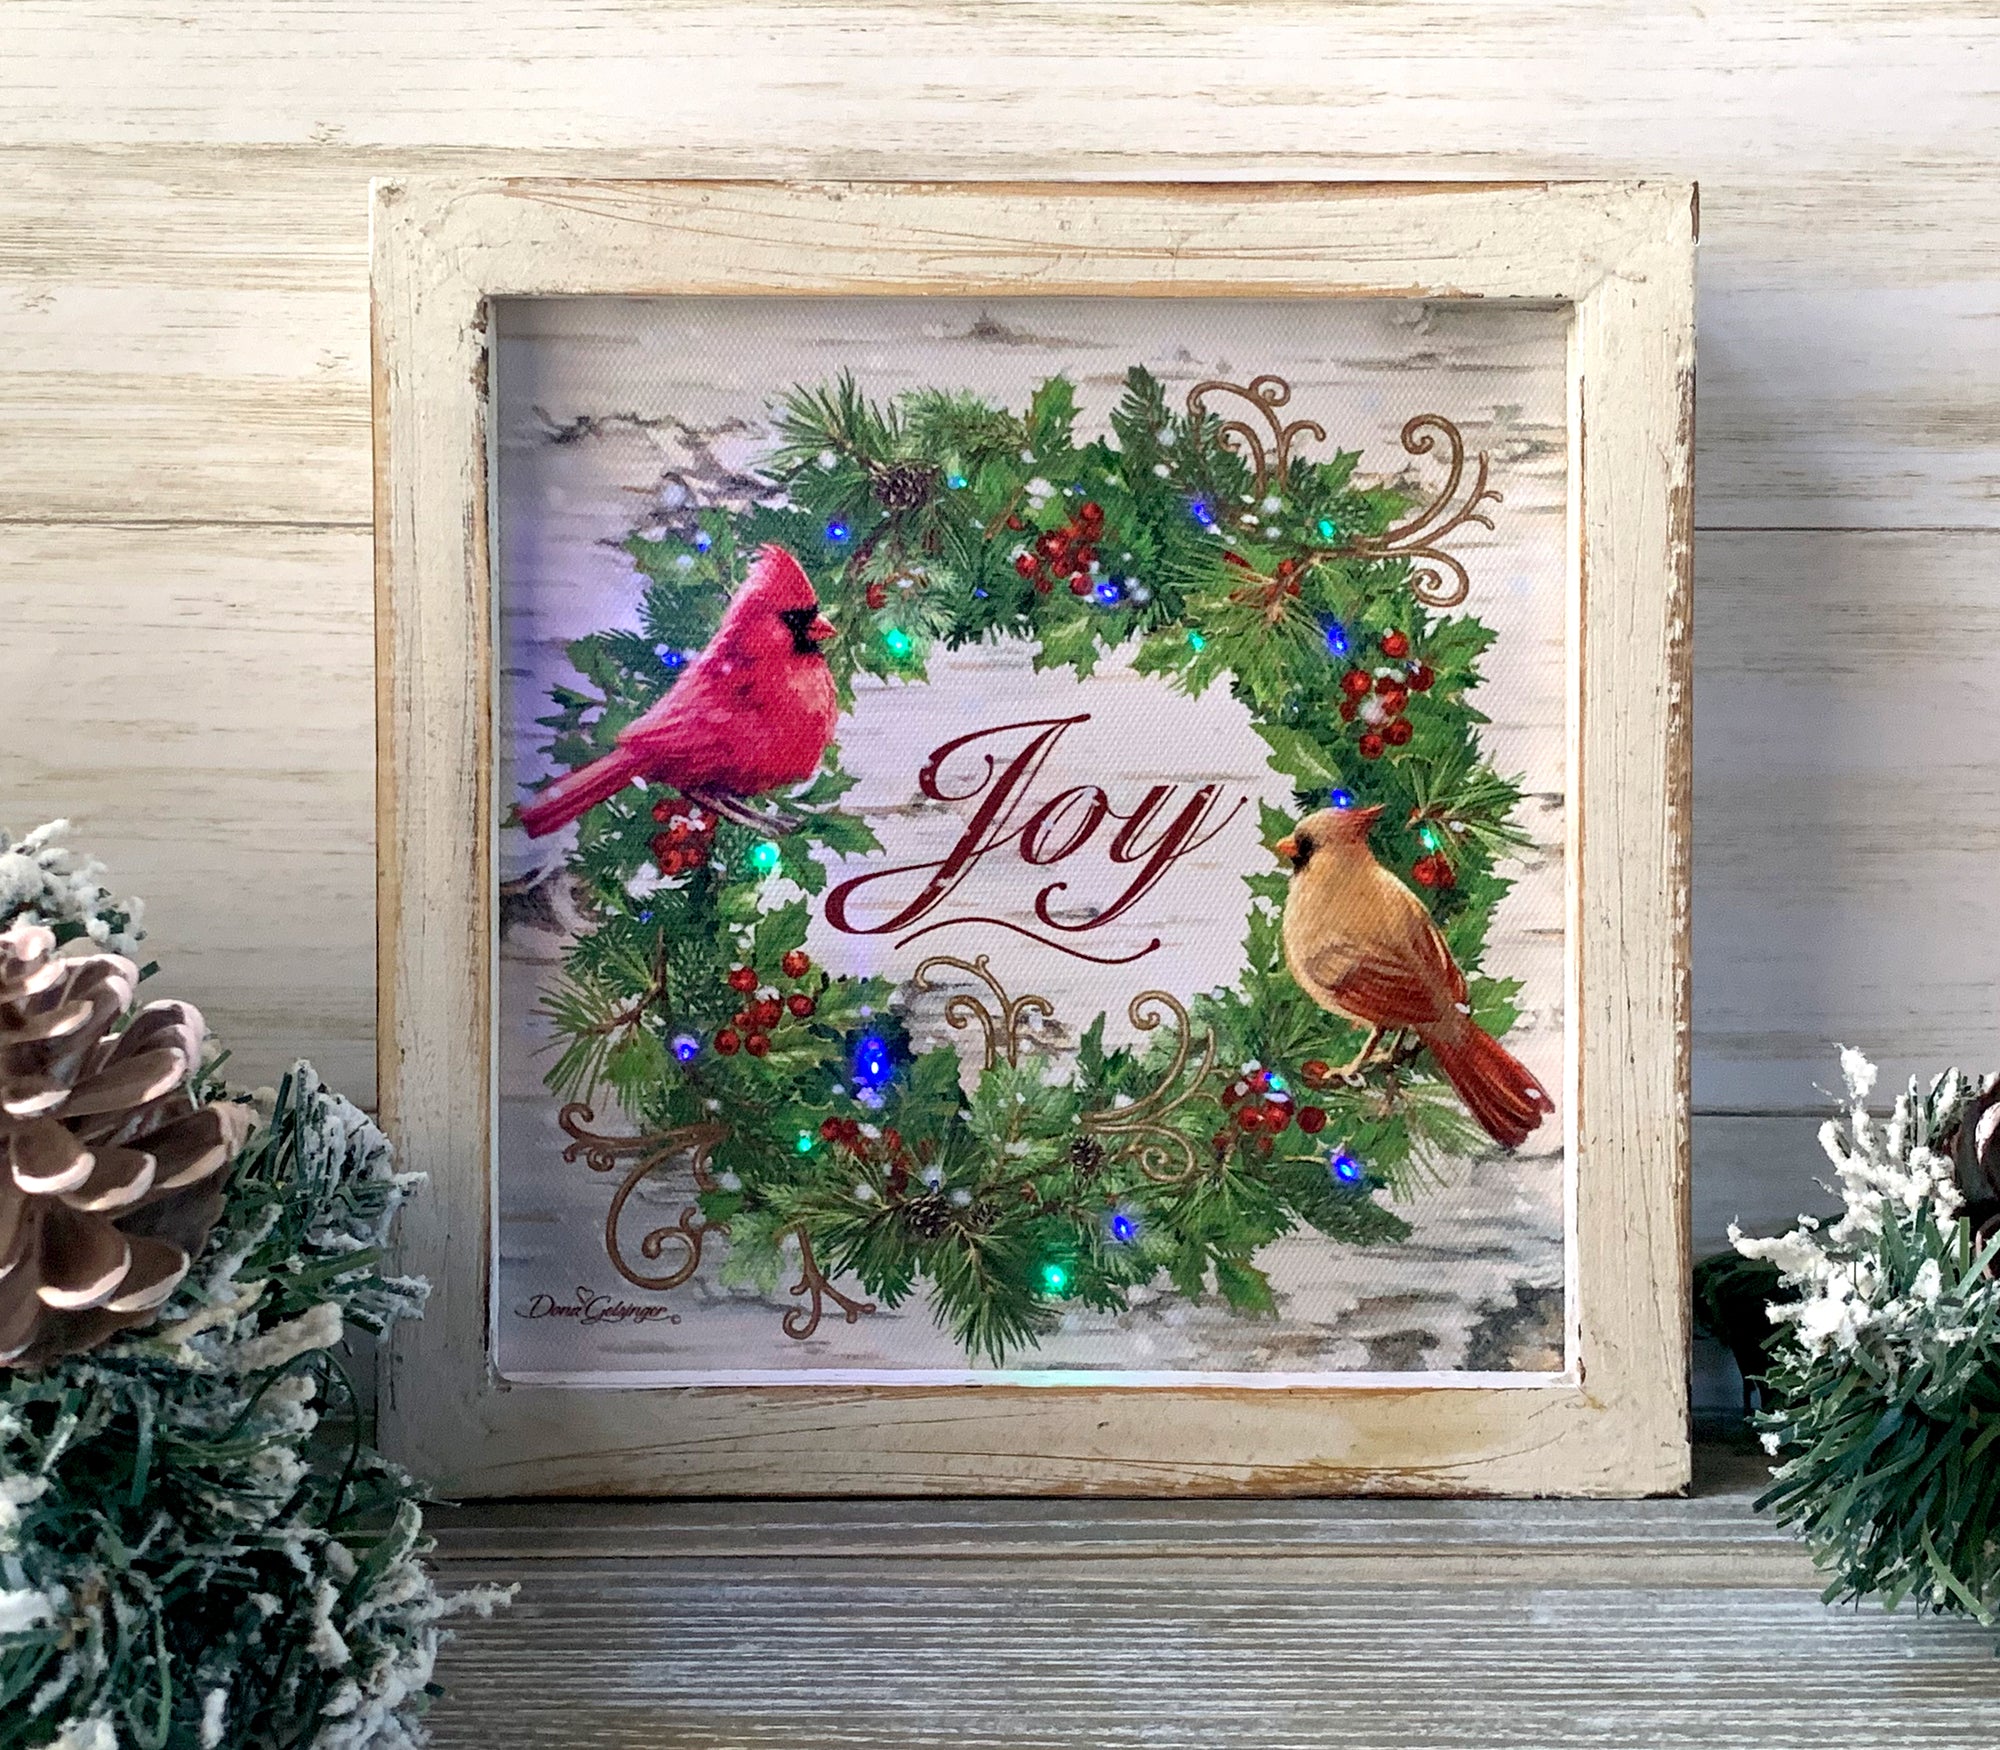 This stunning piece features two lovely cardinals perched on a magnificent wreath, complete with luscious berries, pinecones, and colorful lights that illuminate the scene with a warm glow.  The centerpiece of the wreath reads "joy"